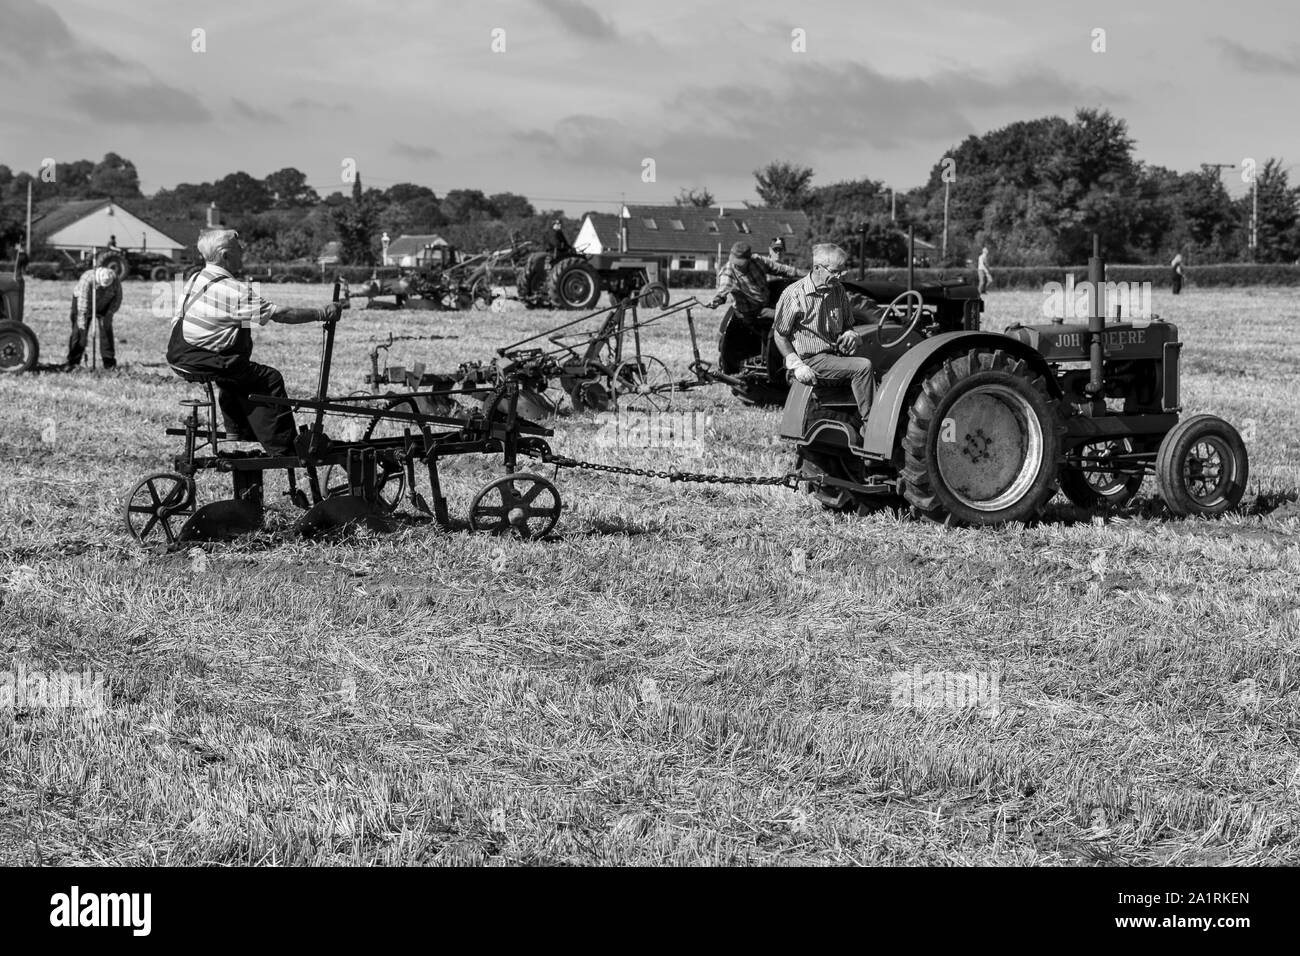 2 Farmers Ploughing using a John Deere General Purpose Vintage Tractor at the Chew Stoke Vintage Tractor and Ploughing Display 2019 Stock Photo